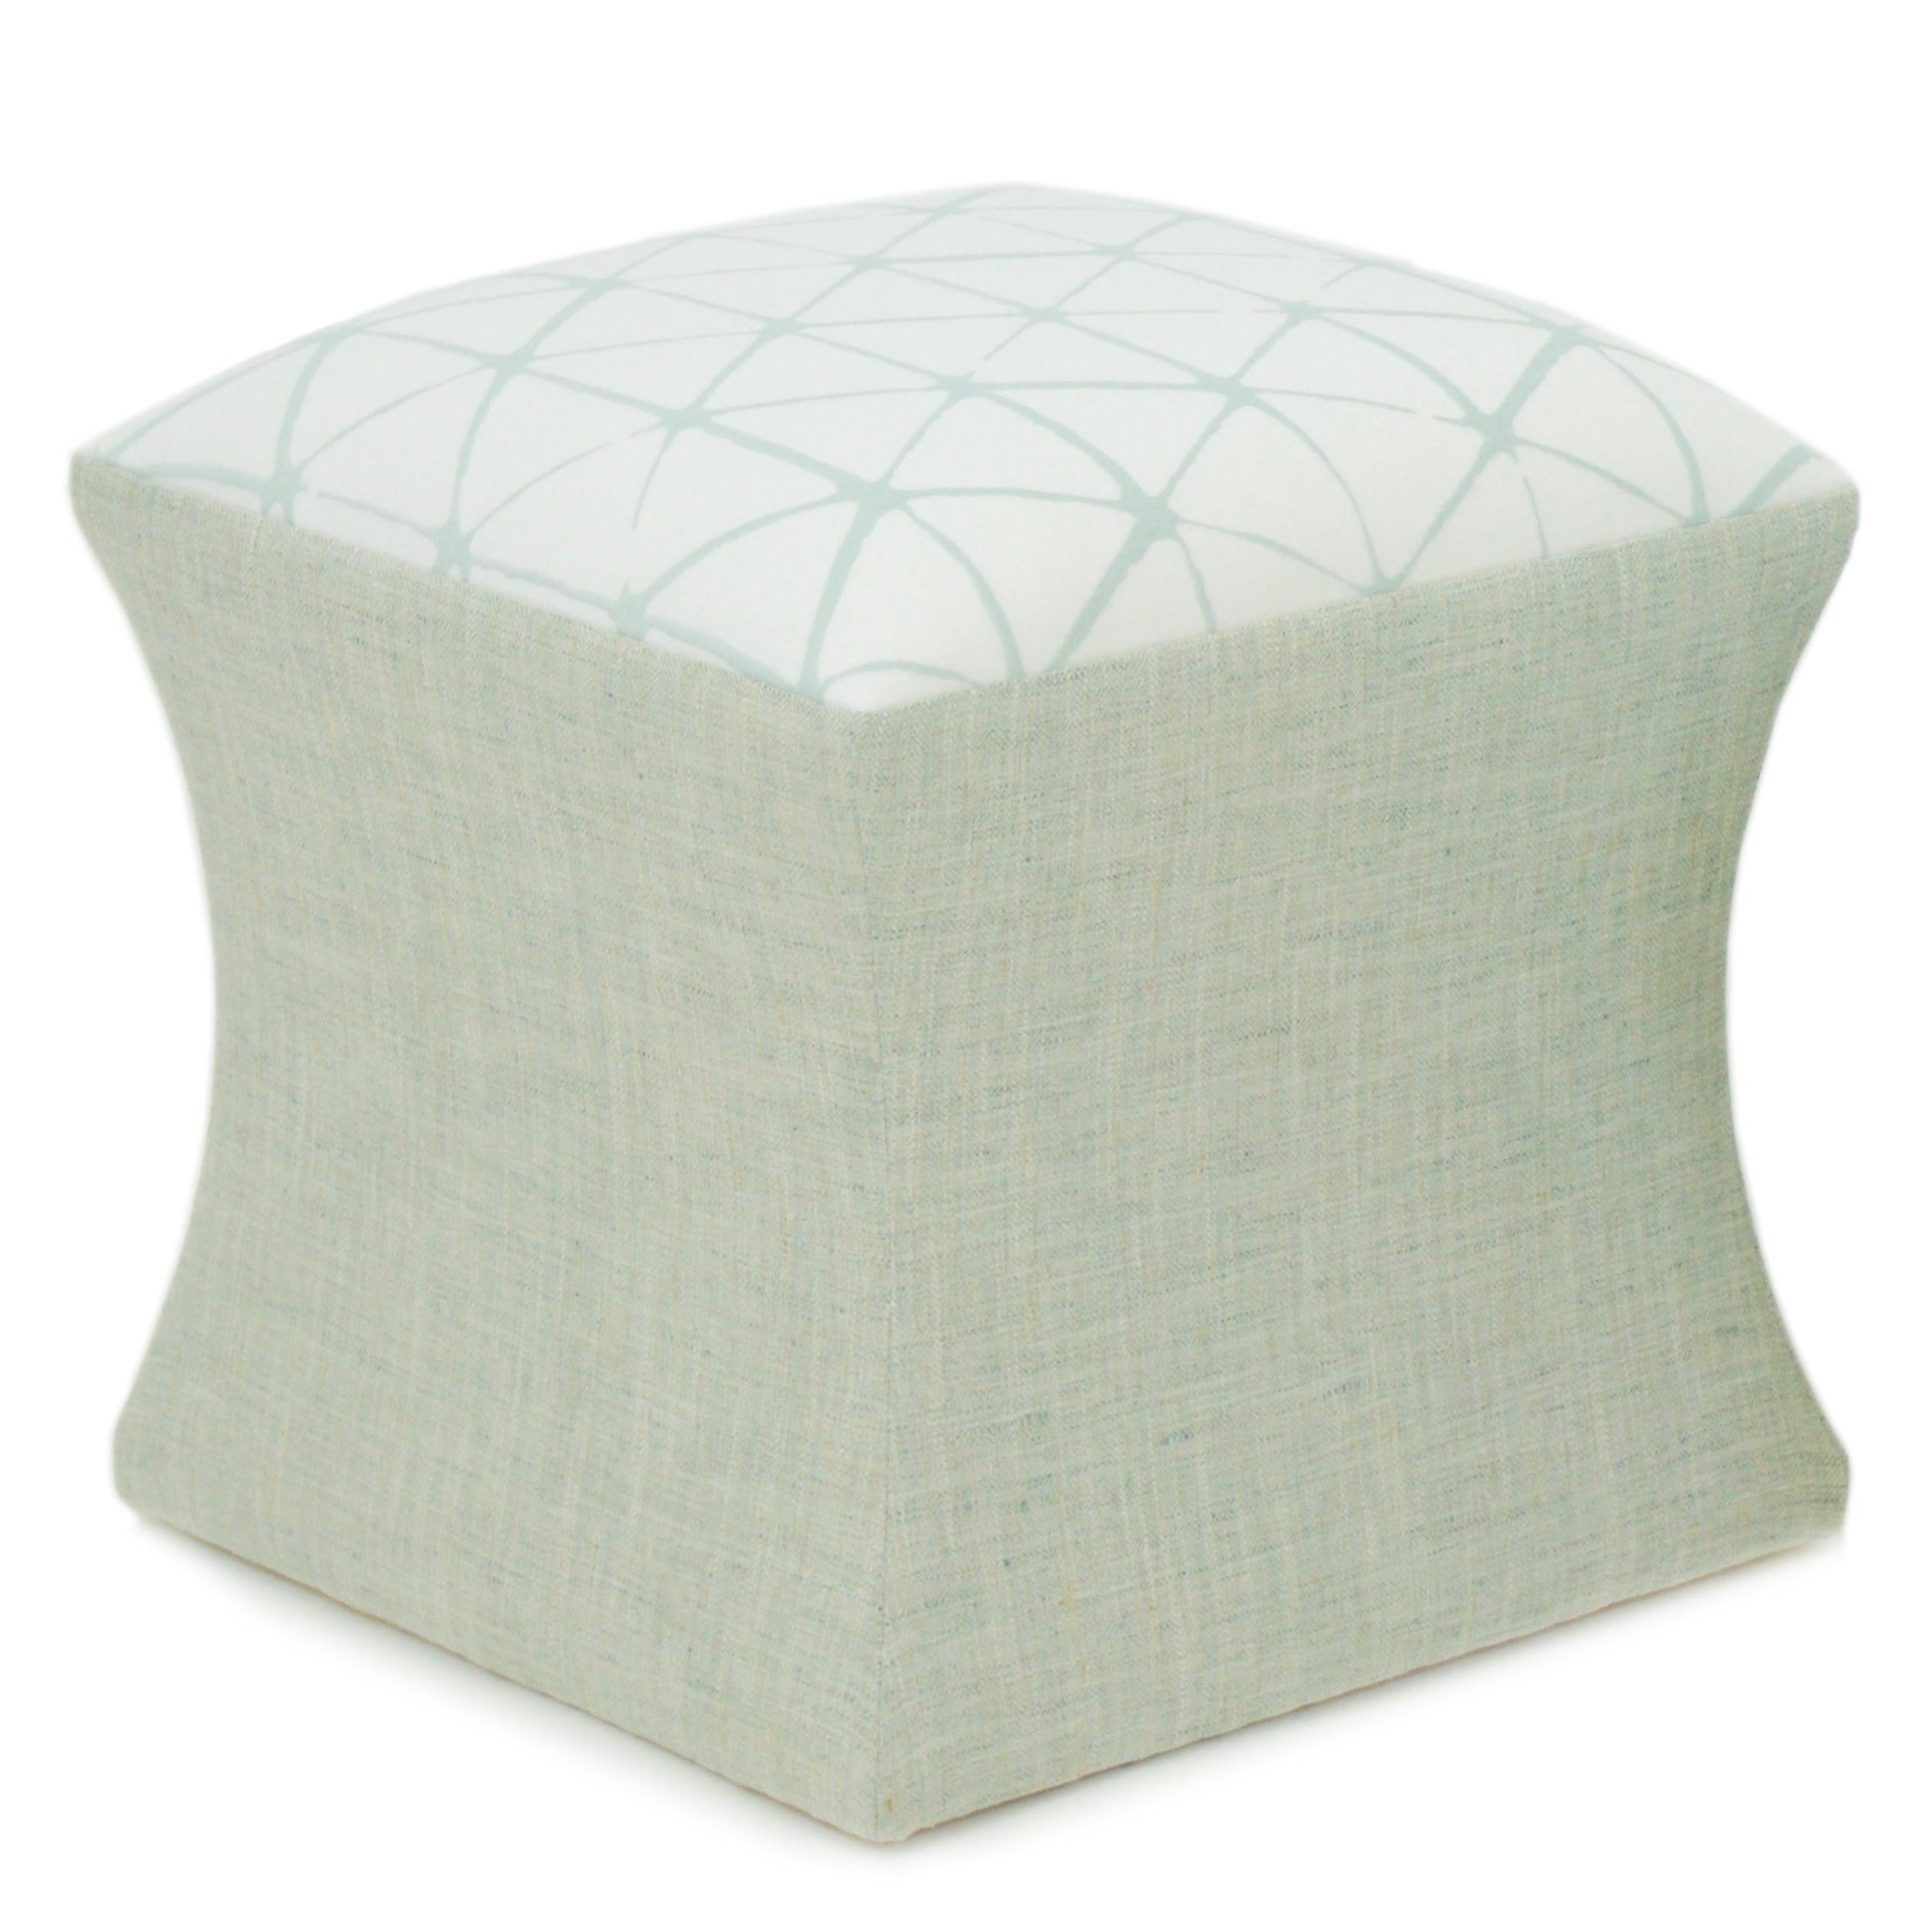 Hour glass shaped small ottoman. Built in solid hard maple topped with a cotton/dacron wrapped foam making it firm, yet comfortable. Piece shown is covered in a lightweight embroidered linen viscose blend with a hexagonal pattern with a hand-drawn